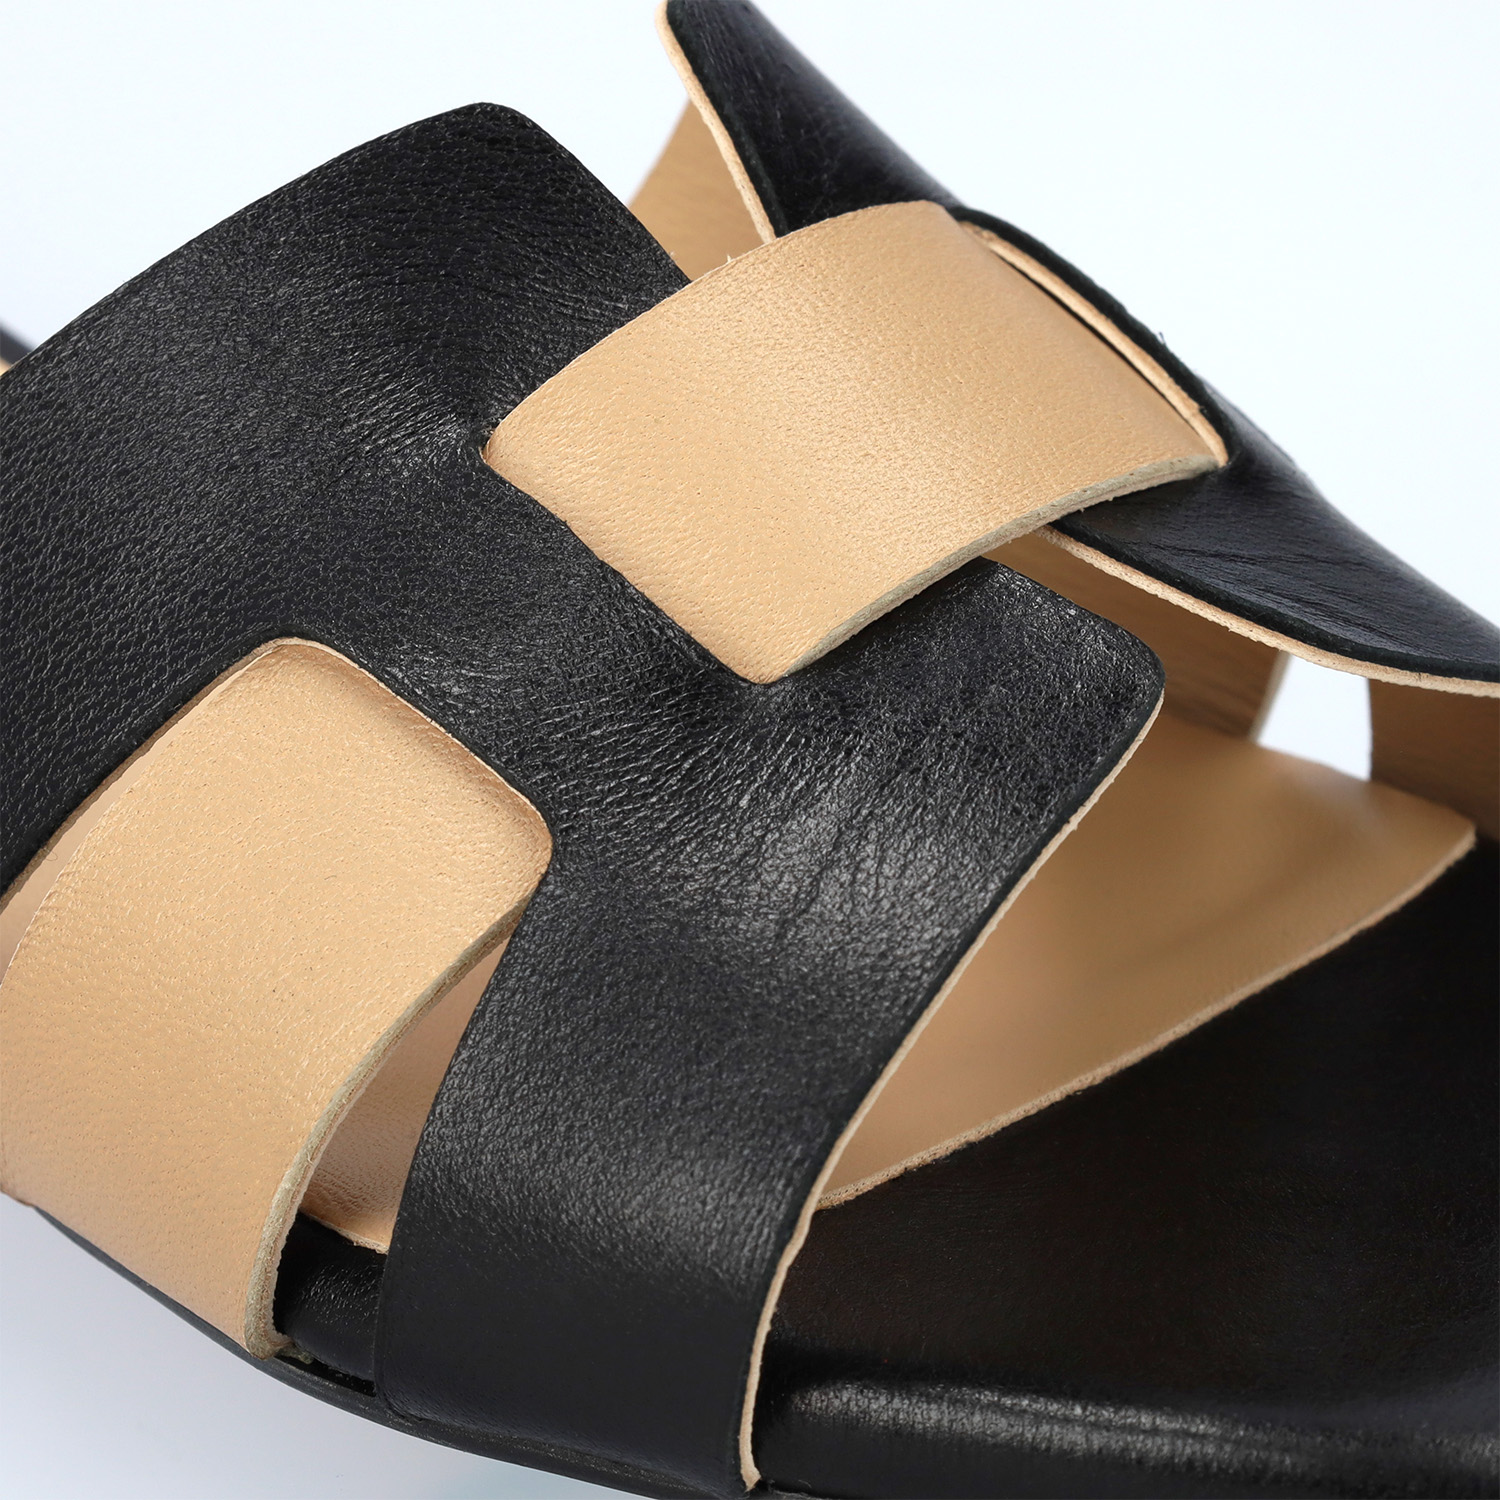 Flat sandals in black and beige leather 